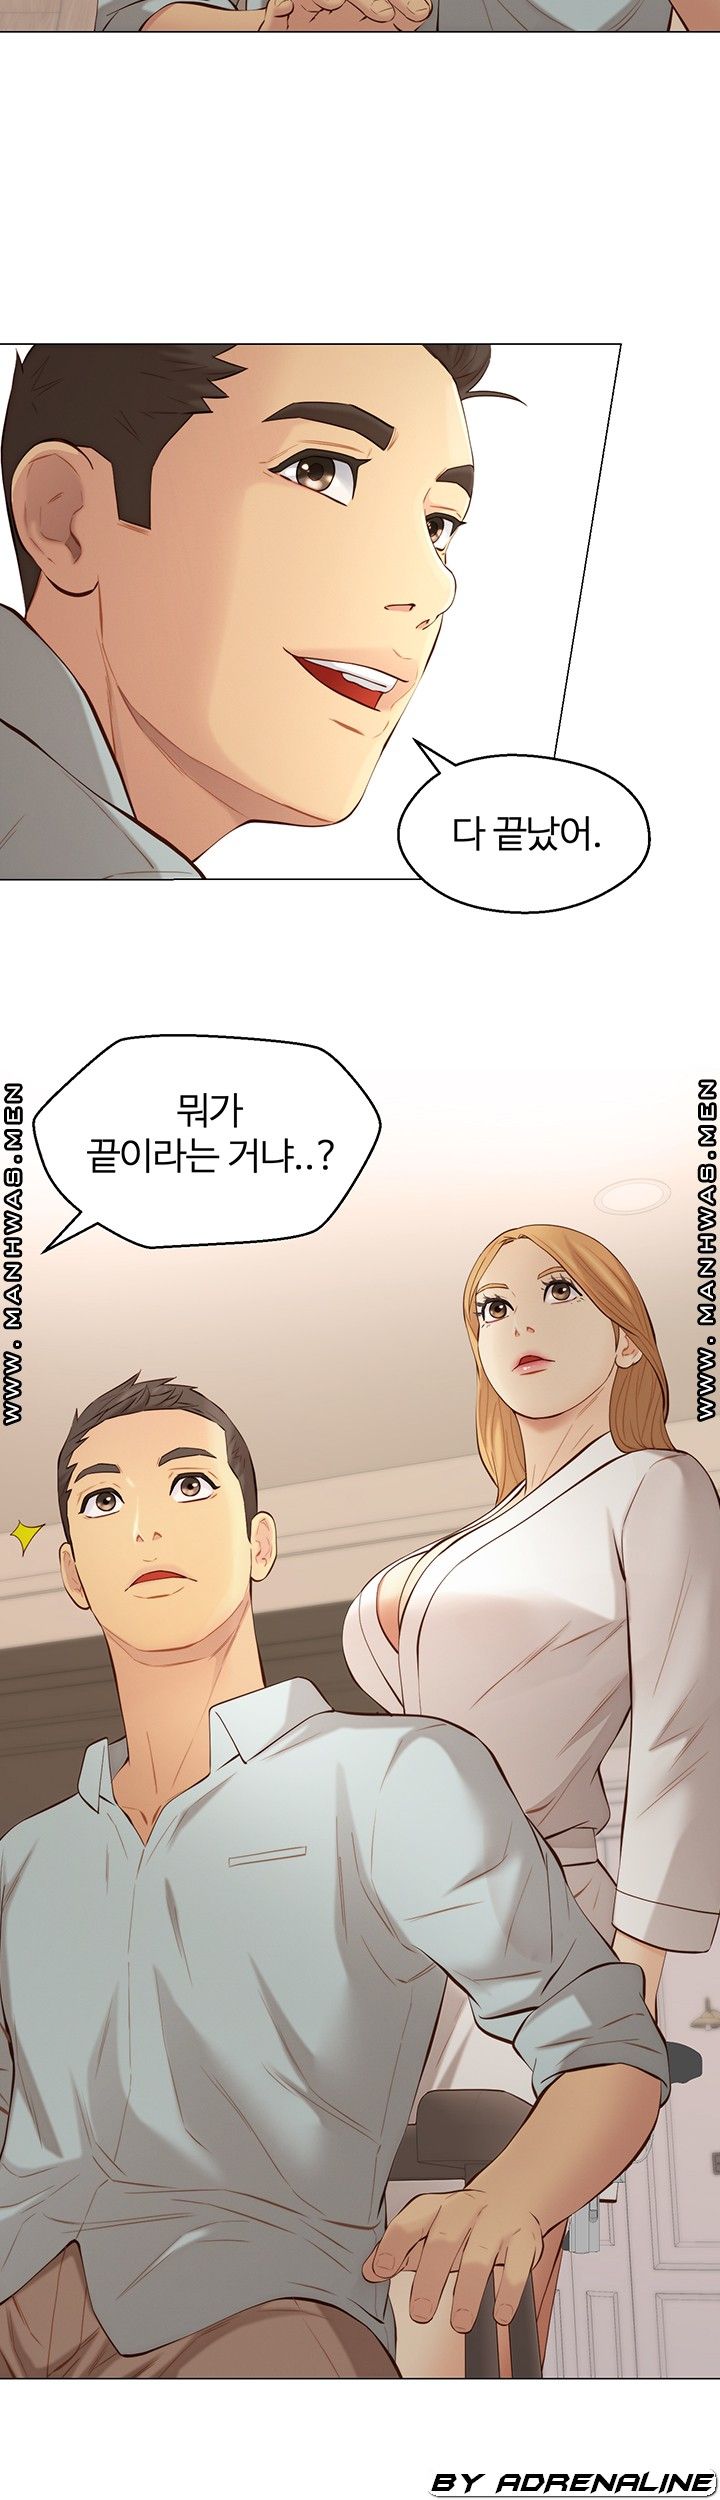 Gamble Raw - Chapter 63 Page 3